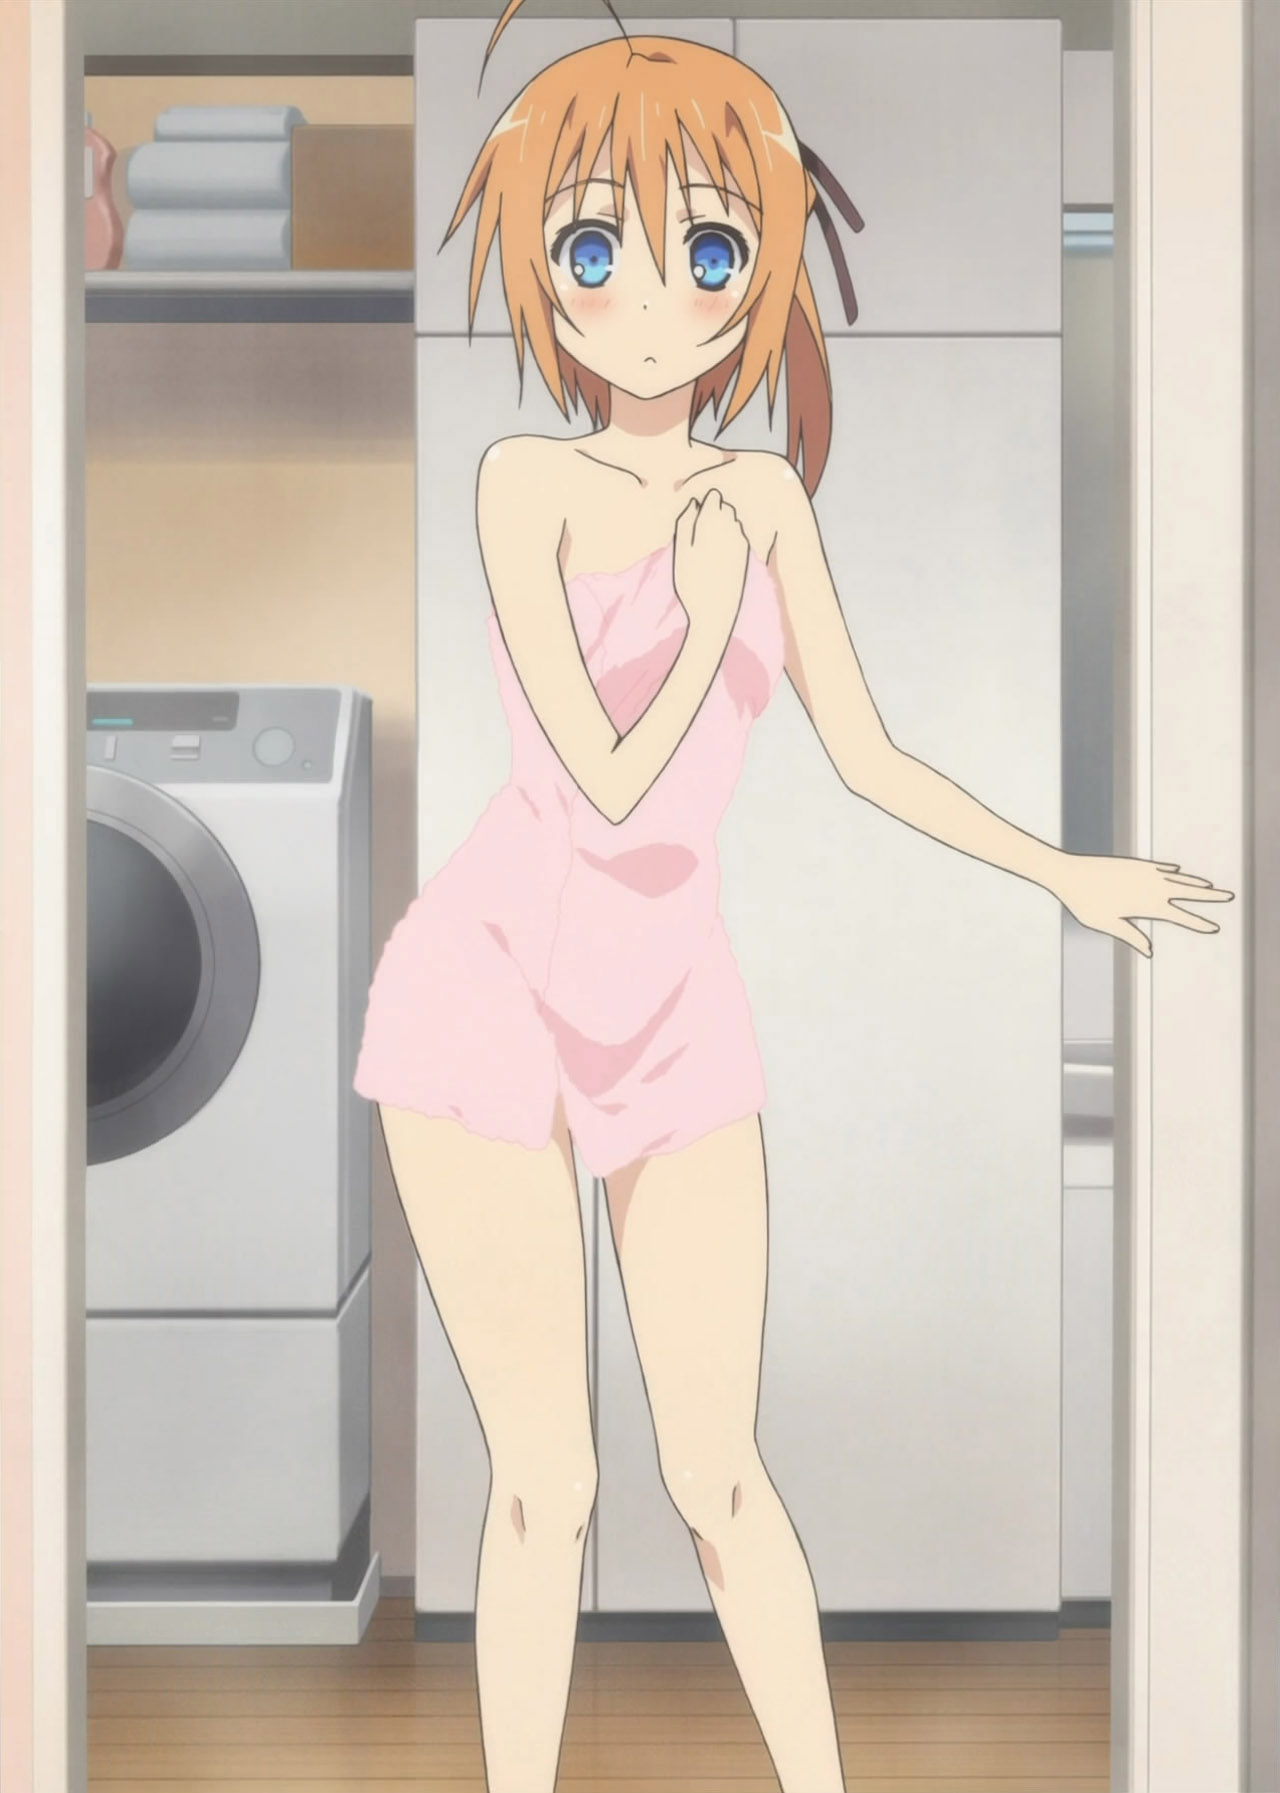 I can’t shake the feeling that Mayo Chiki has... 